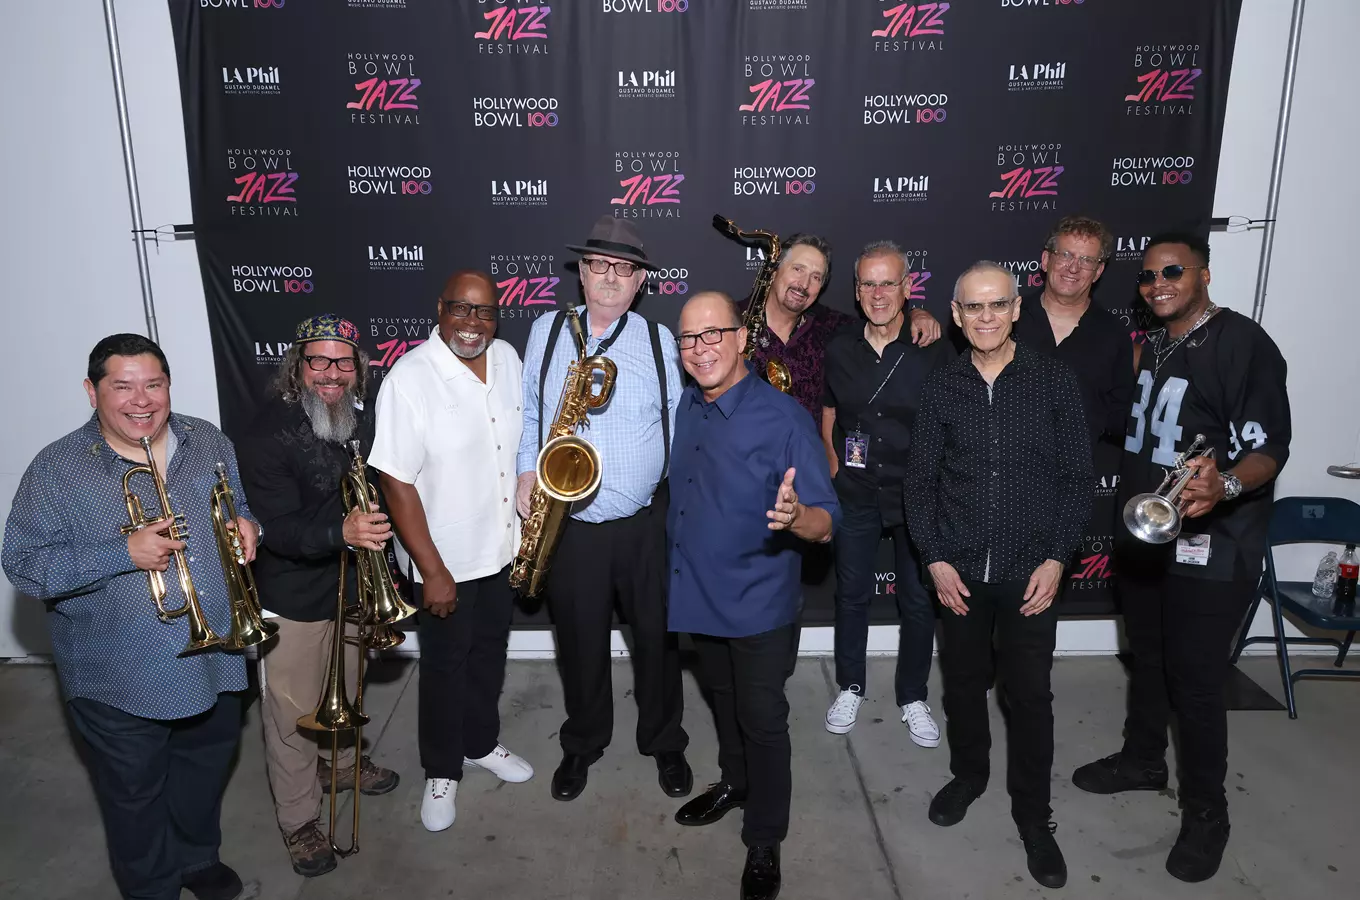 Koncert Tower of Power na Groove Brno